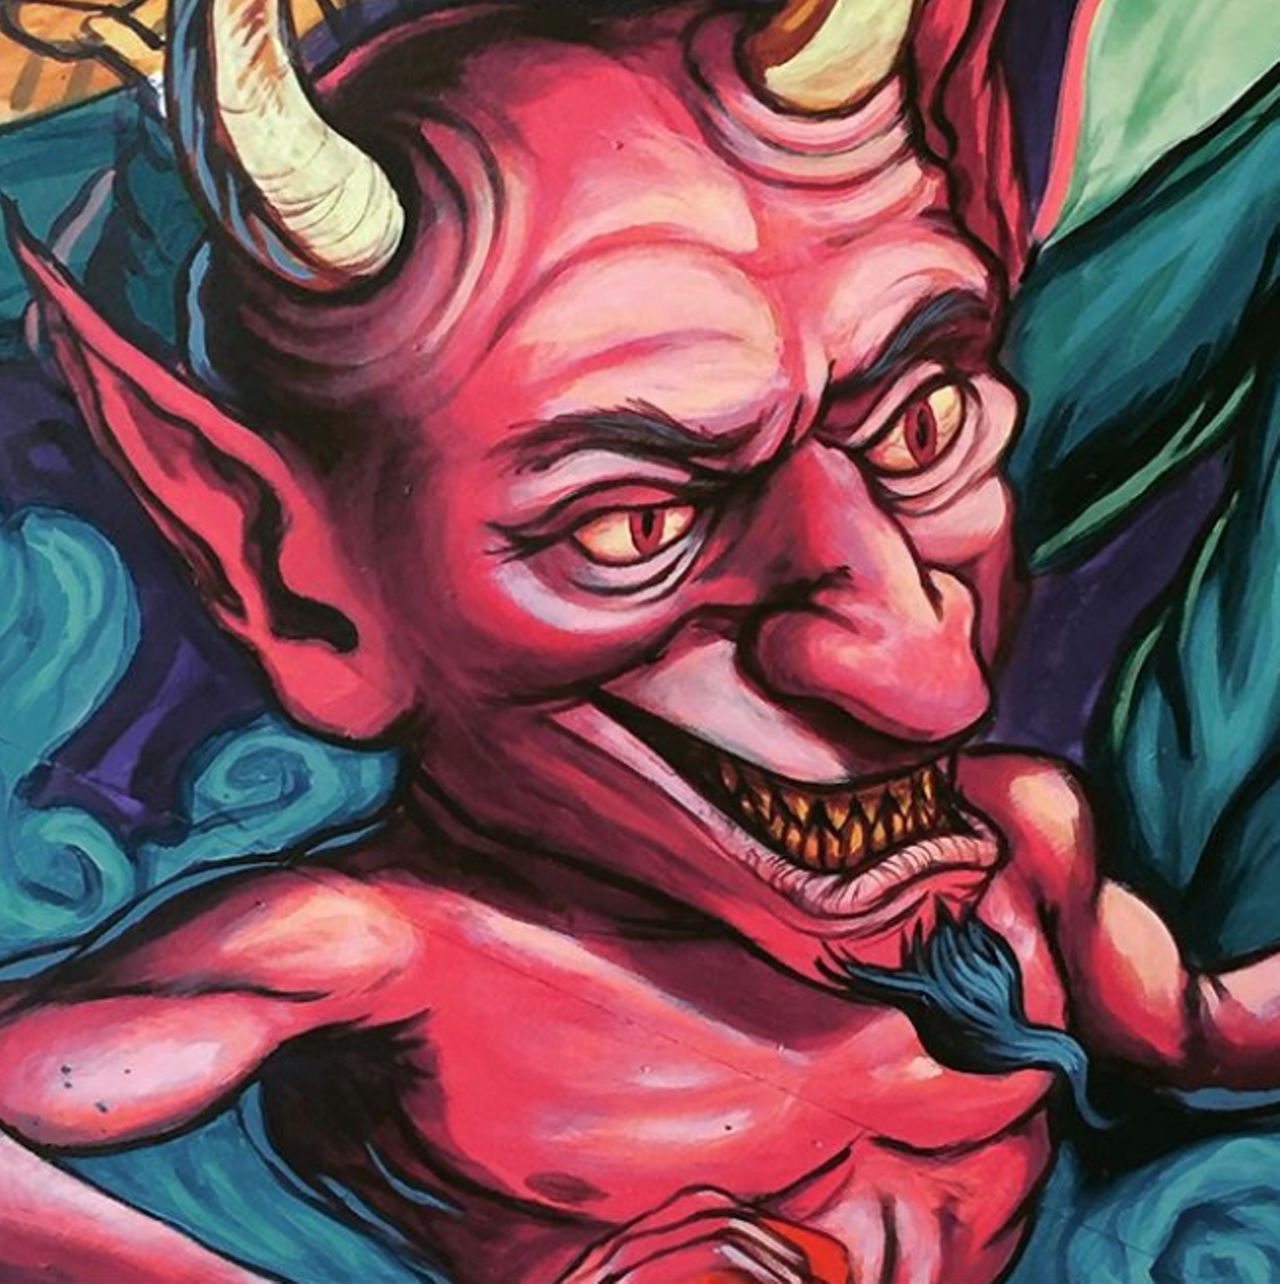 Saying el diablo will take them away forever
Mexican parents often scare their kids into thinking that the devil is going to get them if they don’t behave. Aside from his supposed appearance at a local nightclub back in the ‘70s, Lord Stan himself is used to get kids to stay on the pure path and on the “good” side.
Photo via Instagram / studio_martinez